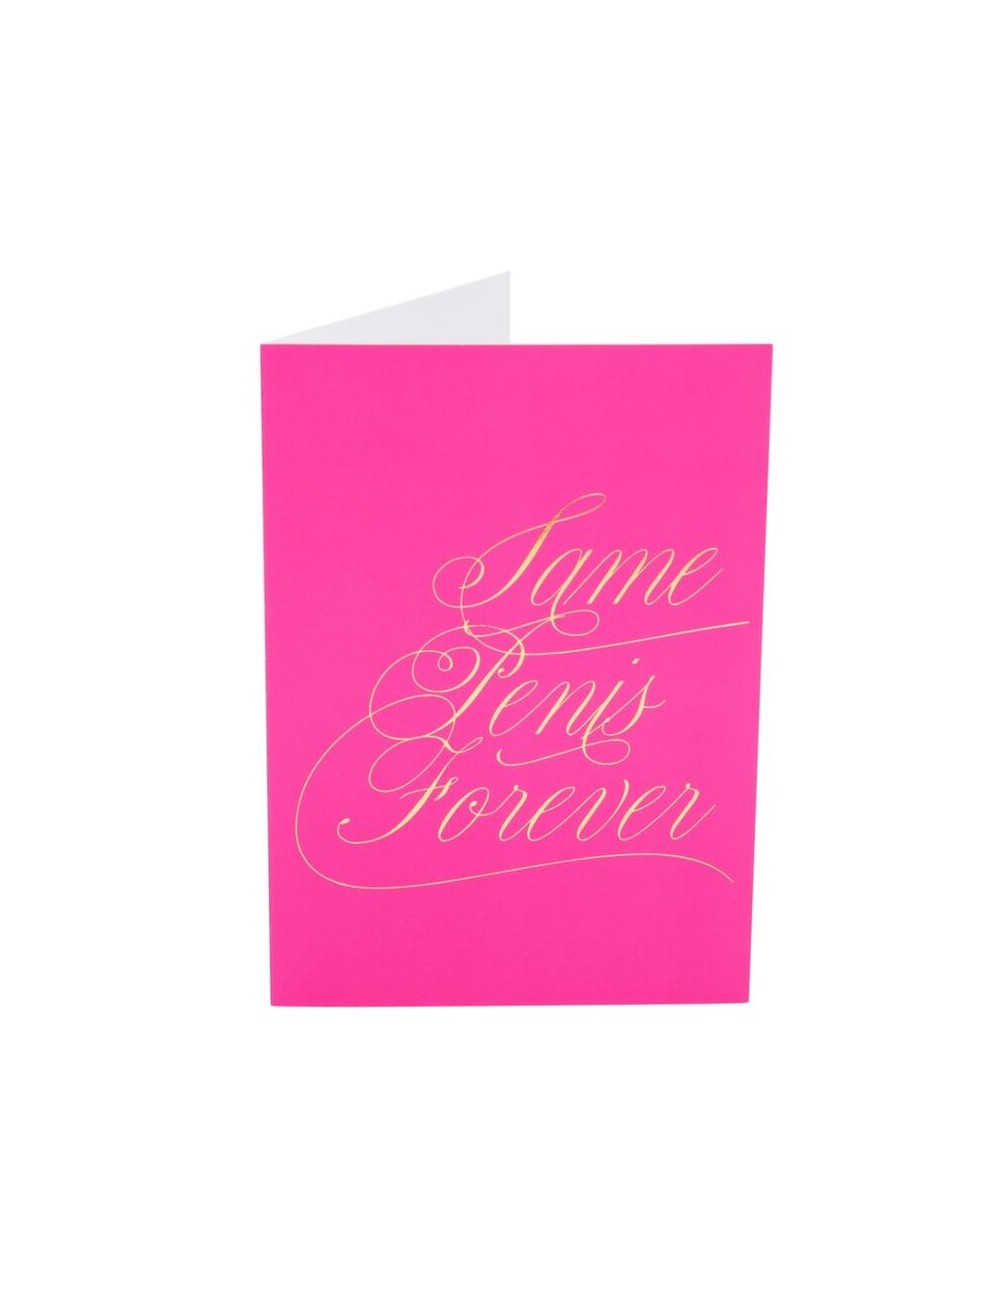 Front of Card shown - Same Penis Forever